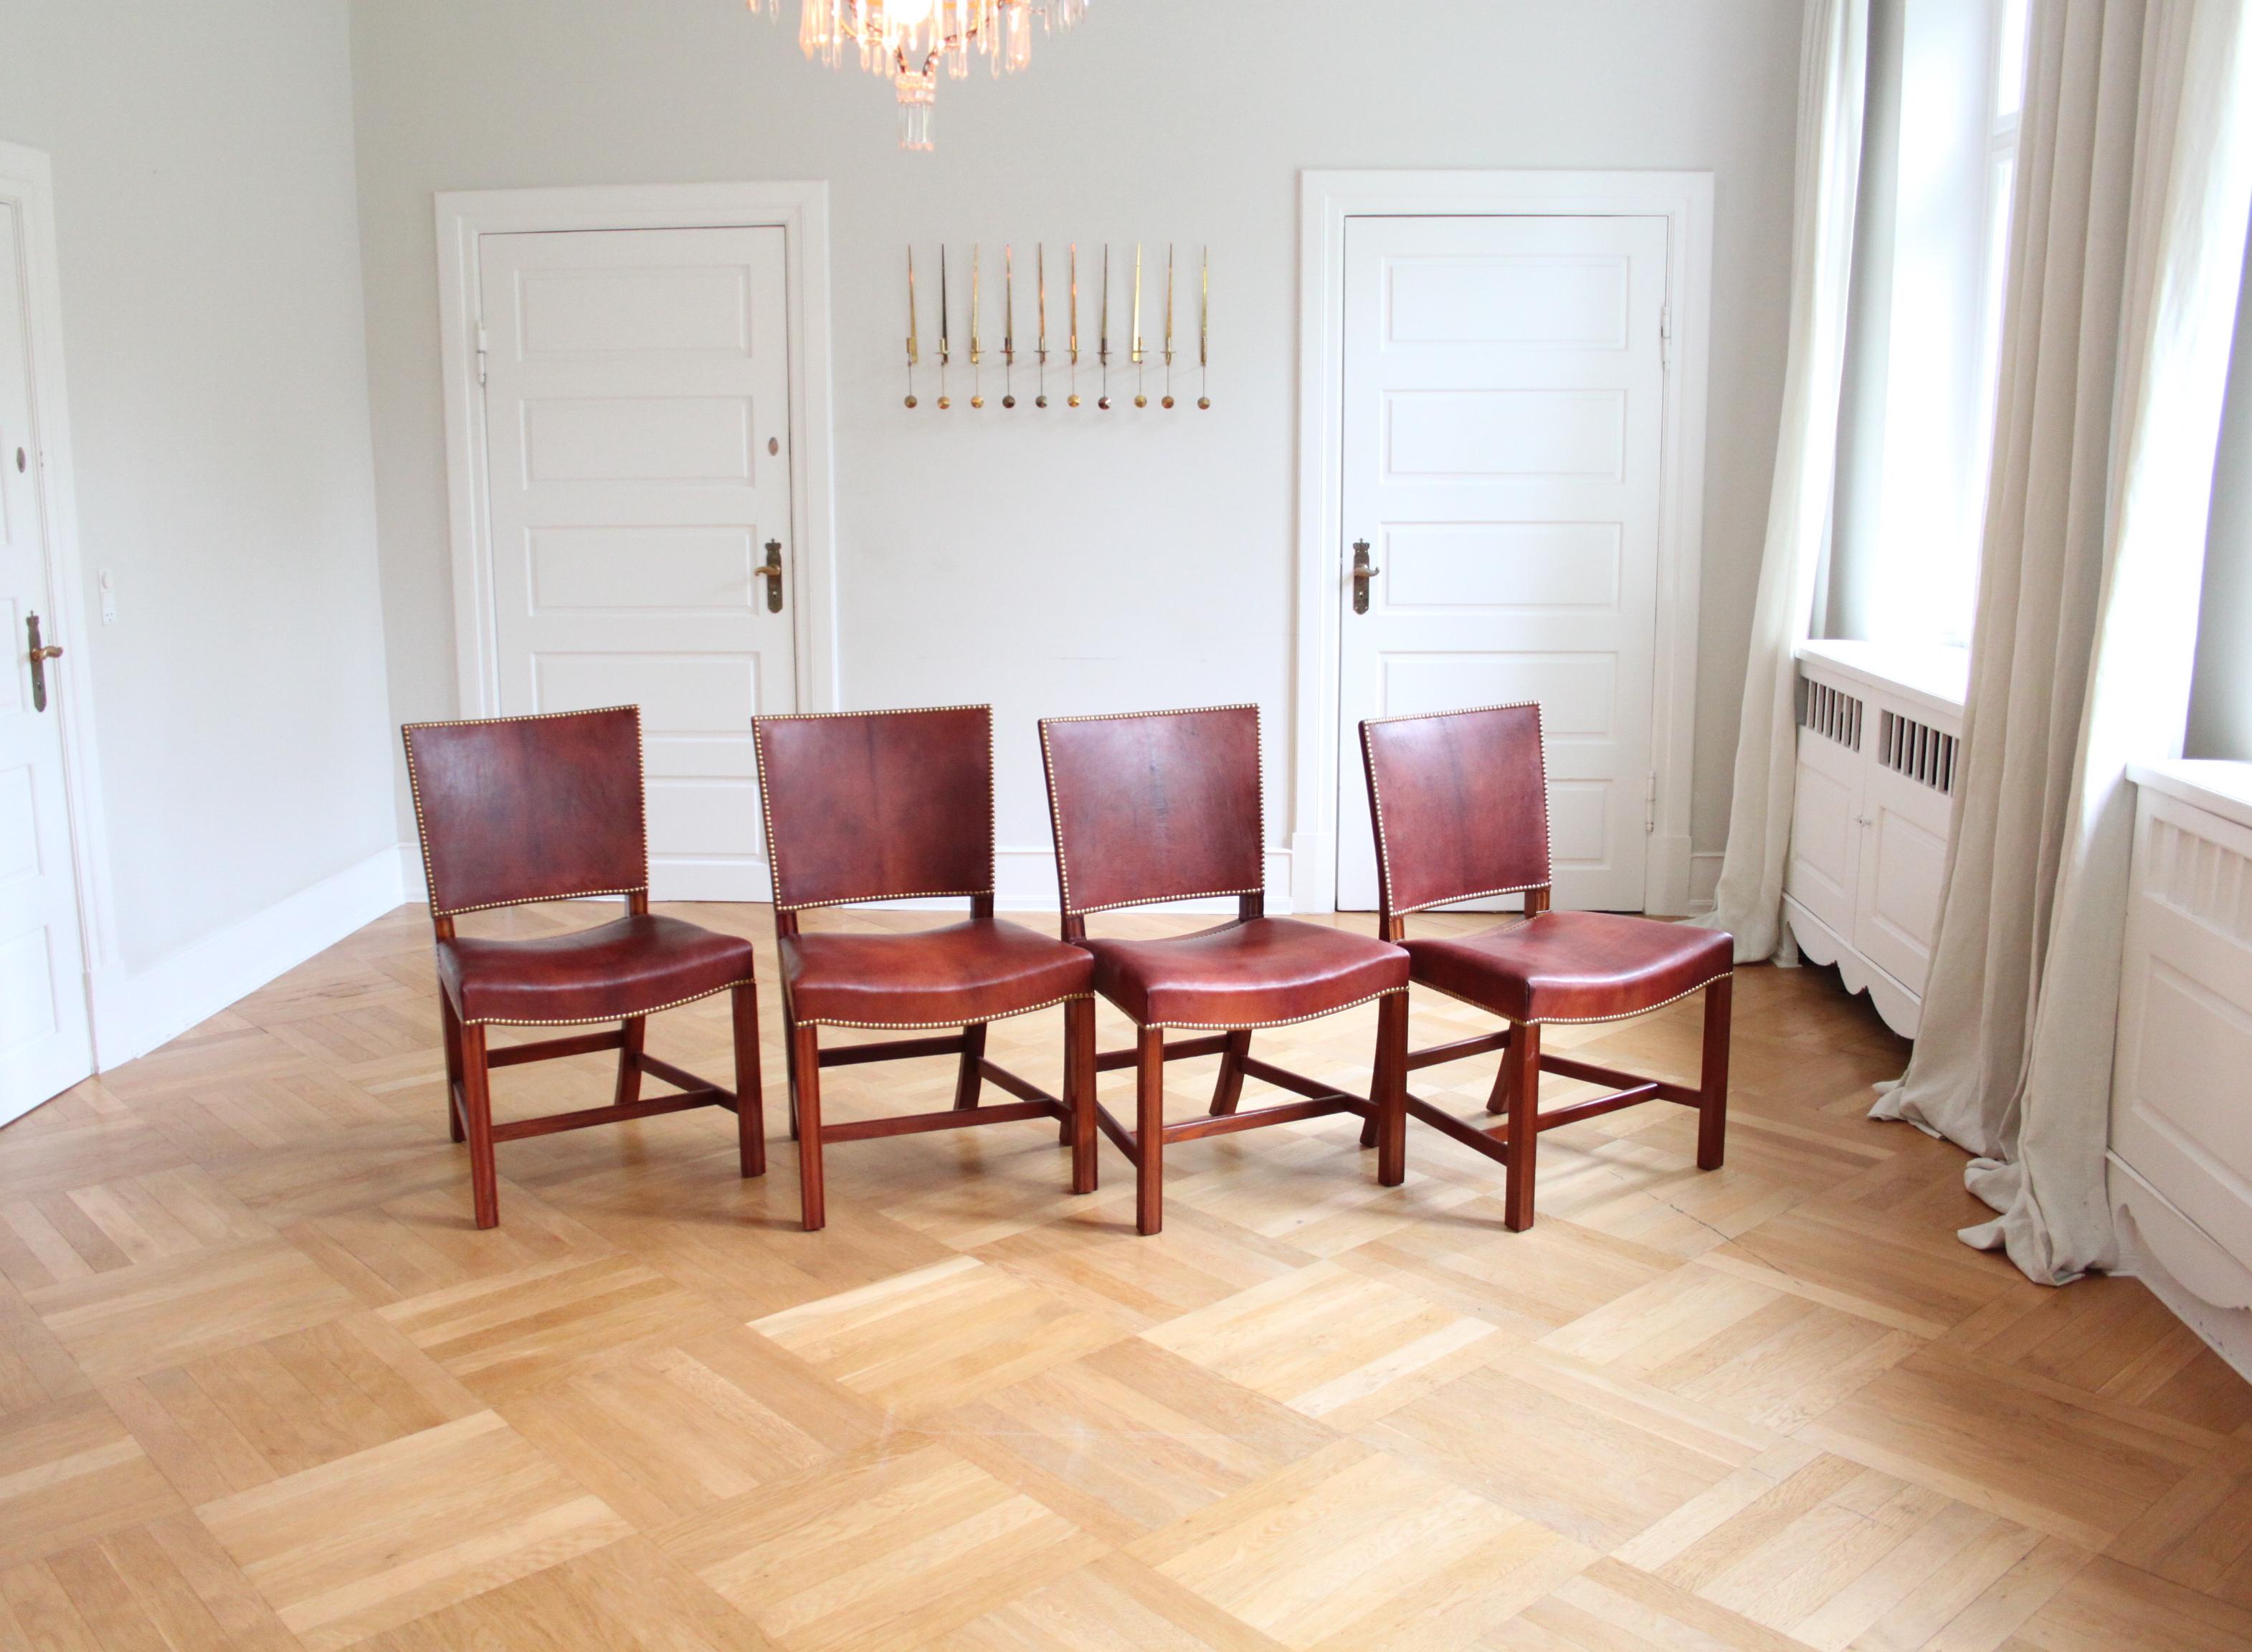 Set of Twelve Kaare Klint Red Chairs, Rud Rasmussen, Niger Leather and Mahogany For Sale 3